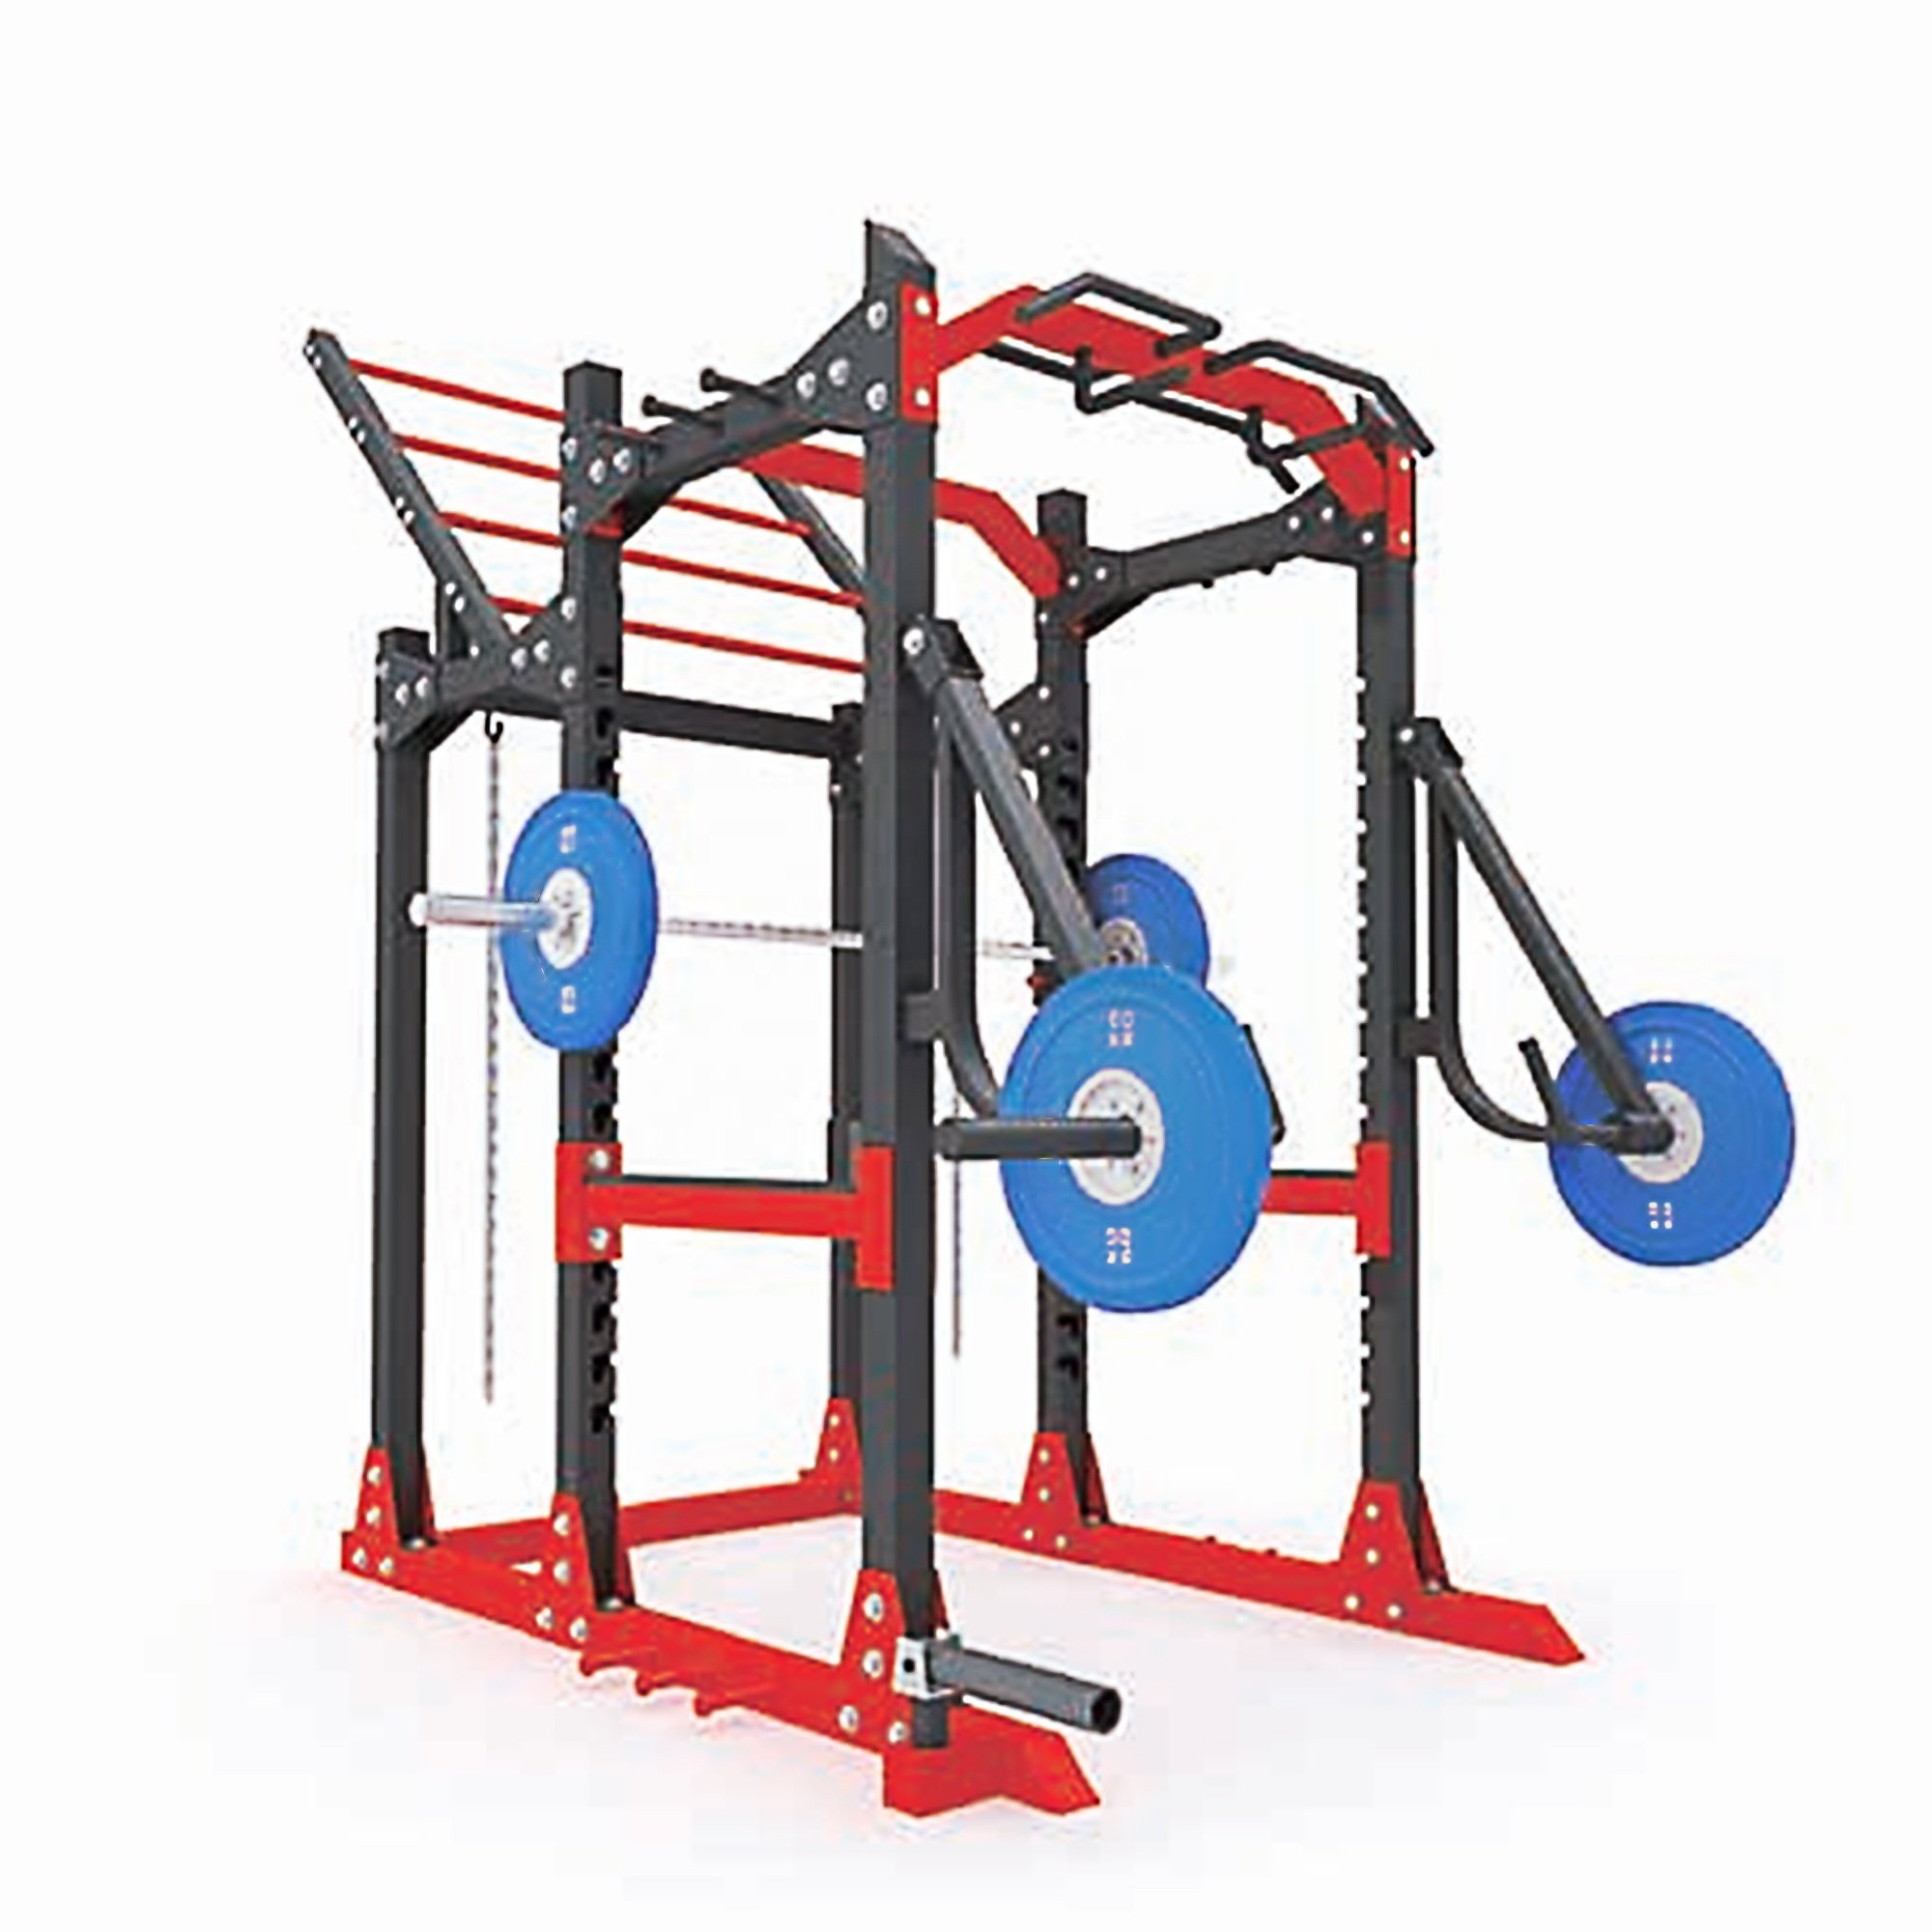 Commercial Plate Loaded Standing Press Machine Gym Fitness Equipment